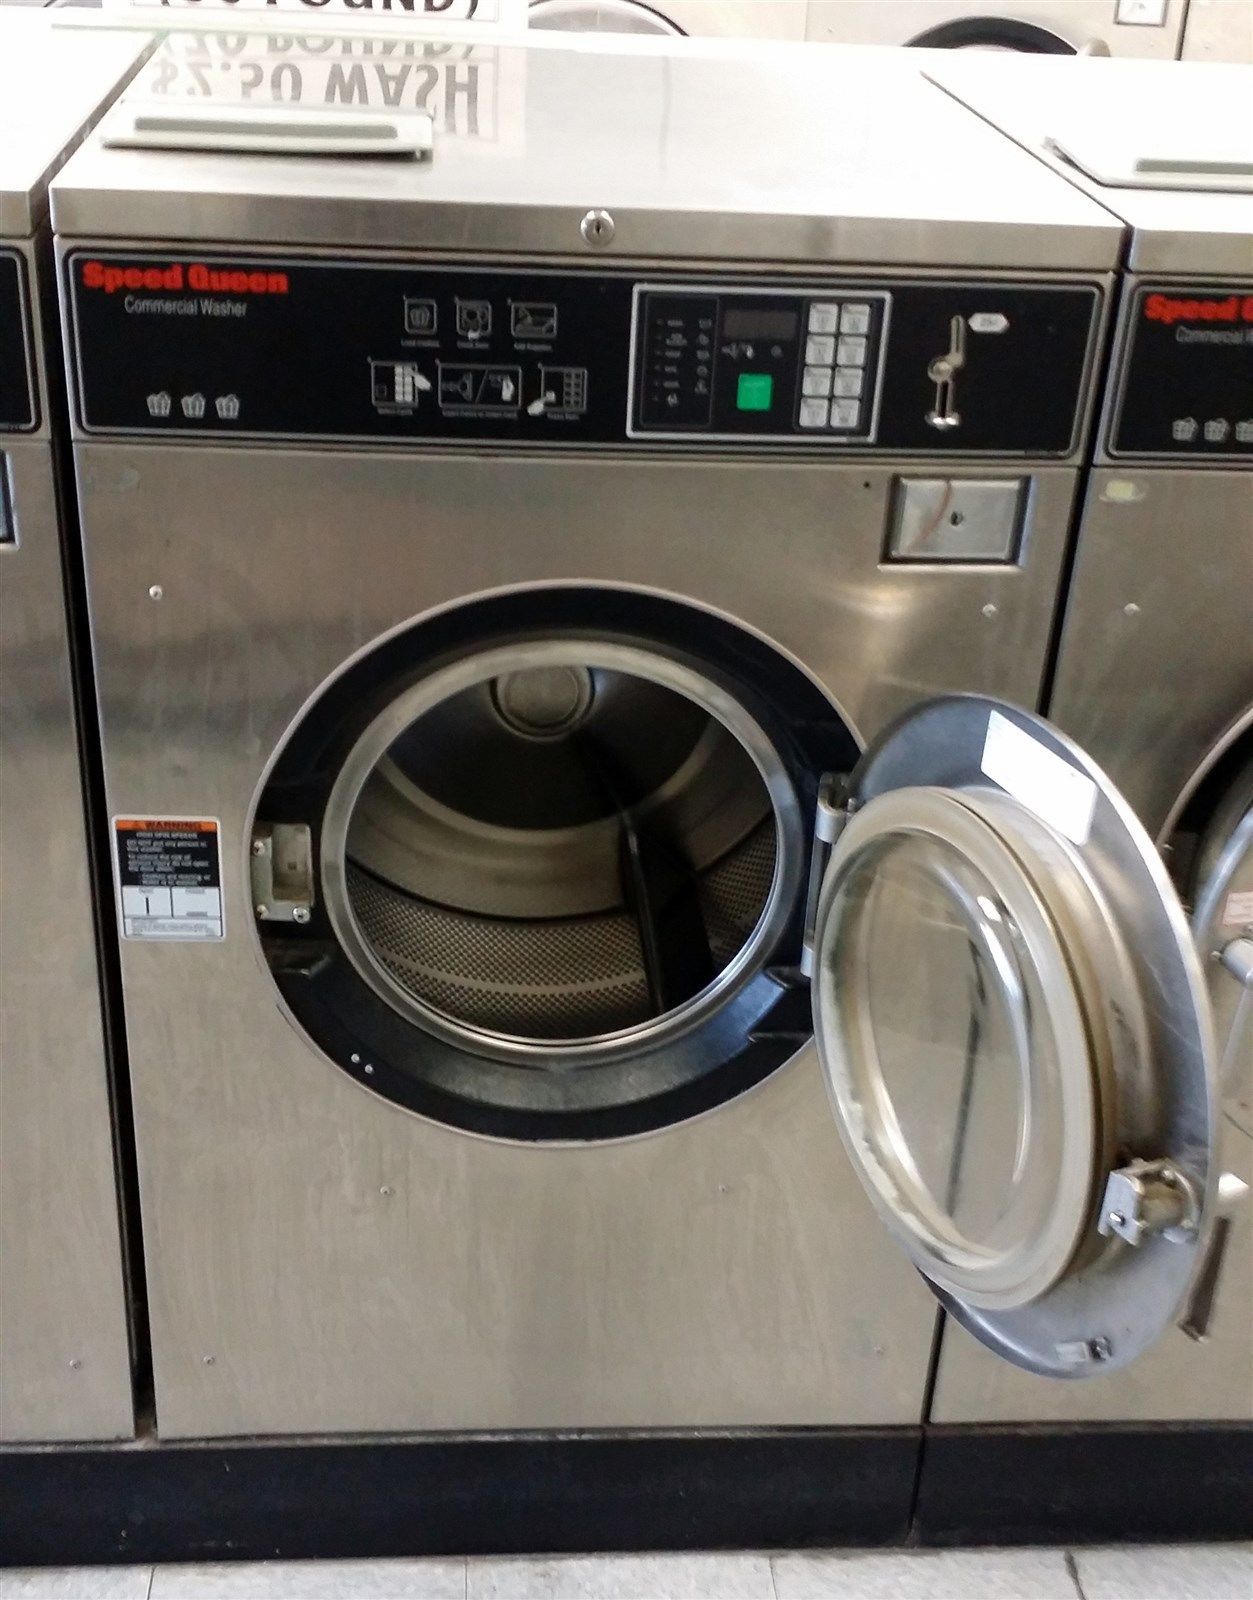 Speed Queen Frontload Washer 1phase 208-240v Stainless Steel ...